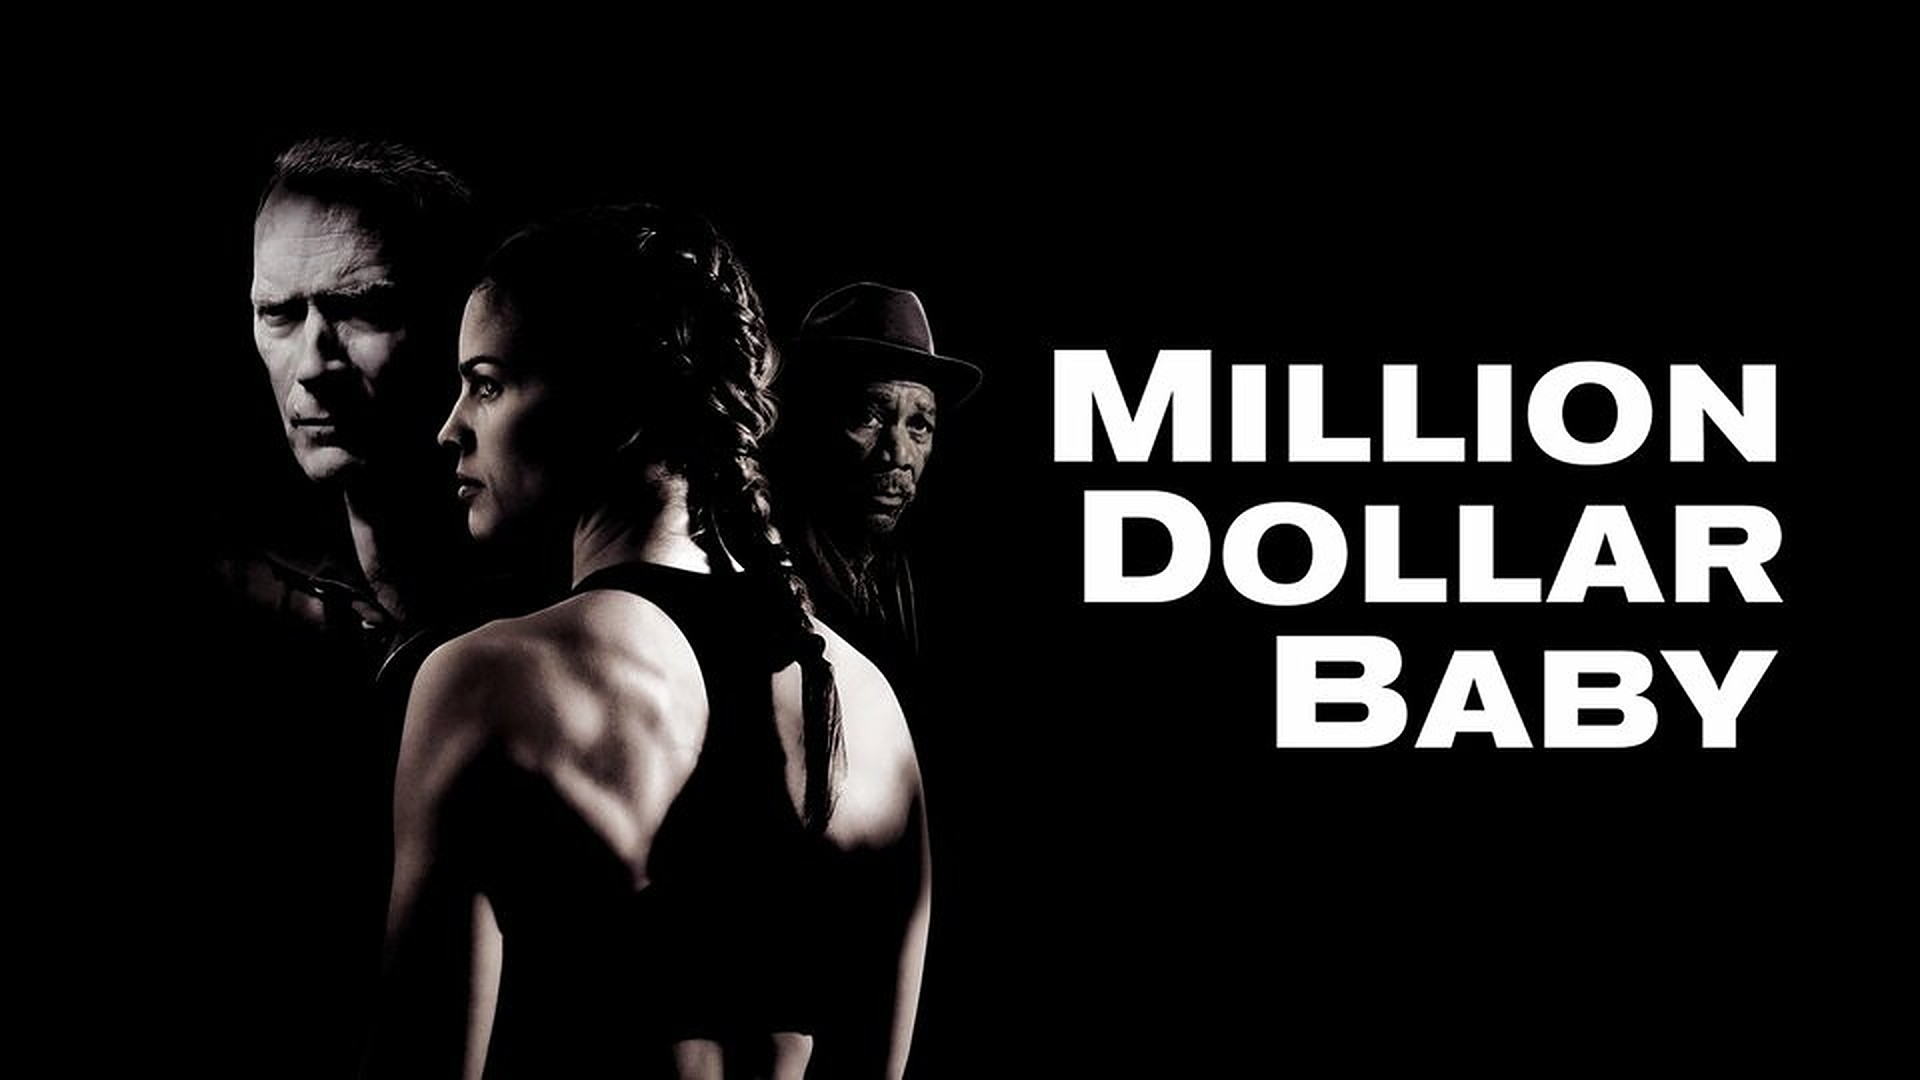 33-facts-about-the-movie-million-dollar-baby